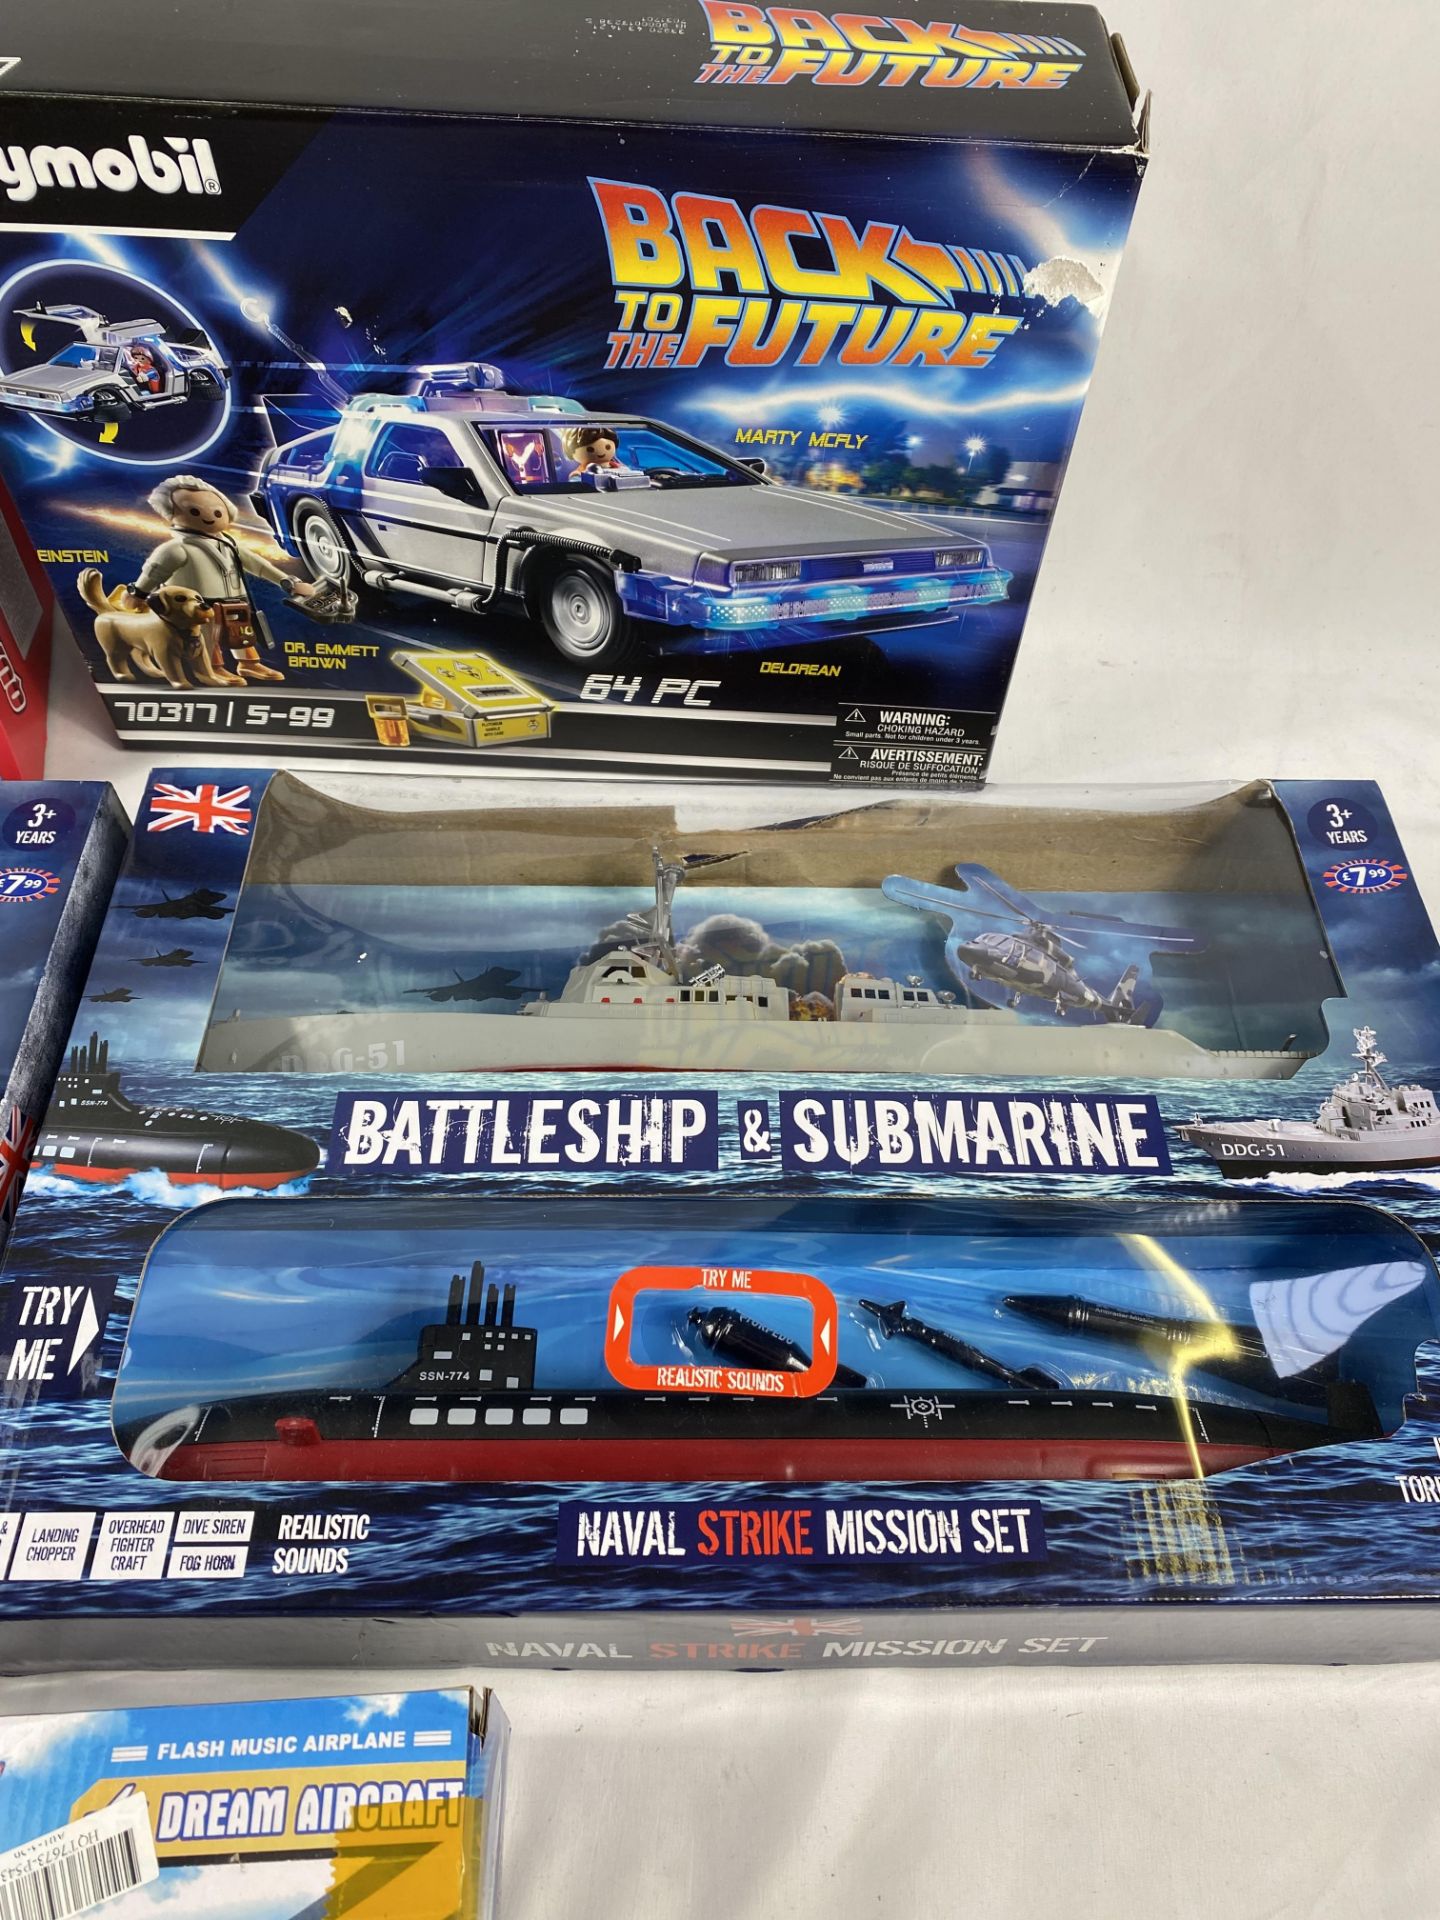 Two Battleship & Submarine Naval Strike Mission sets; Playmobil Back to the Future, Quad-core drone. - Image 2 of 4